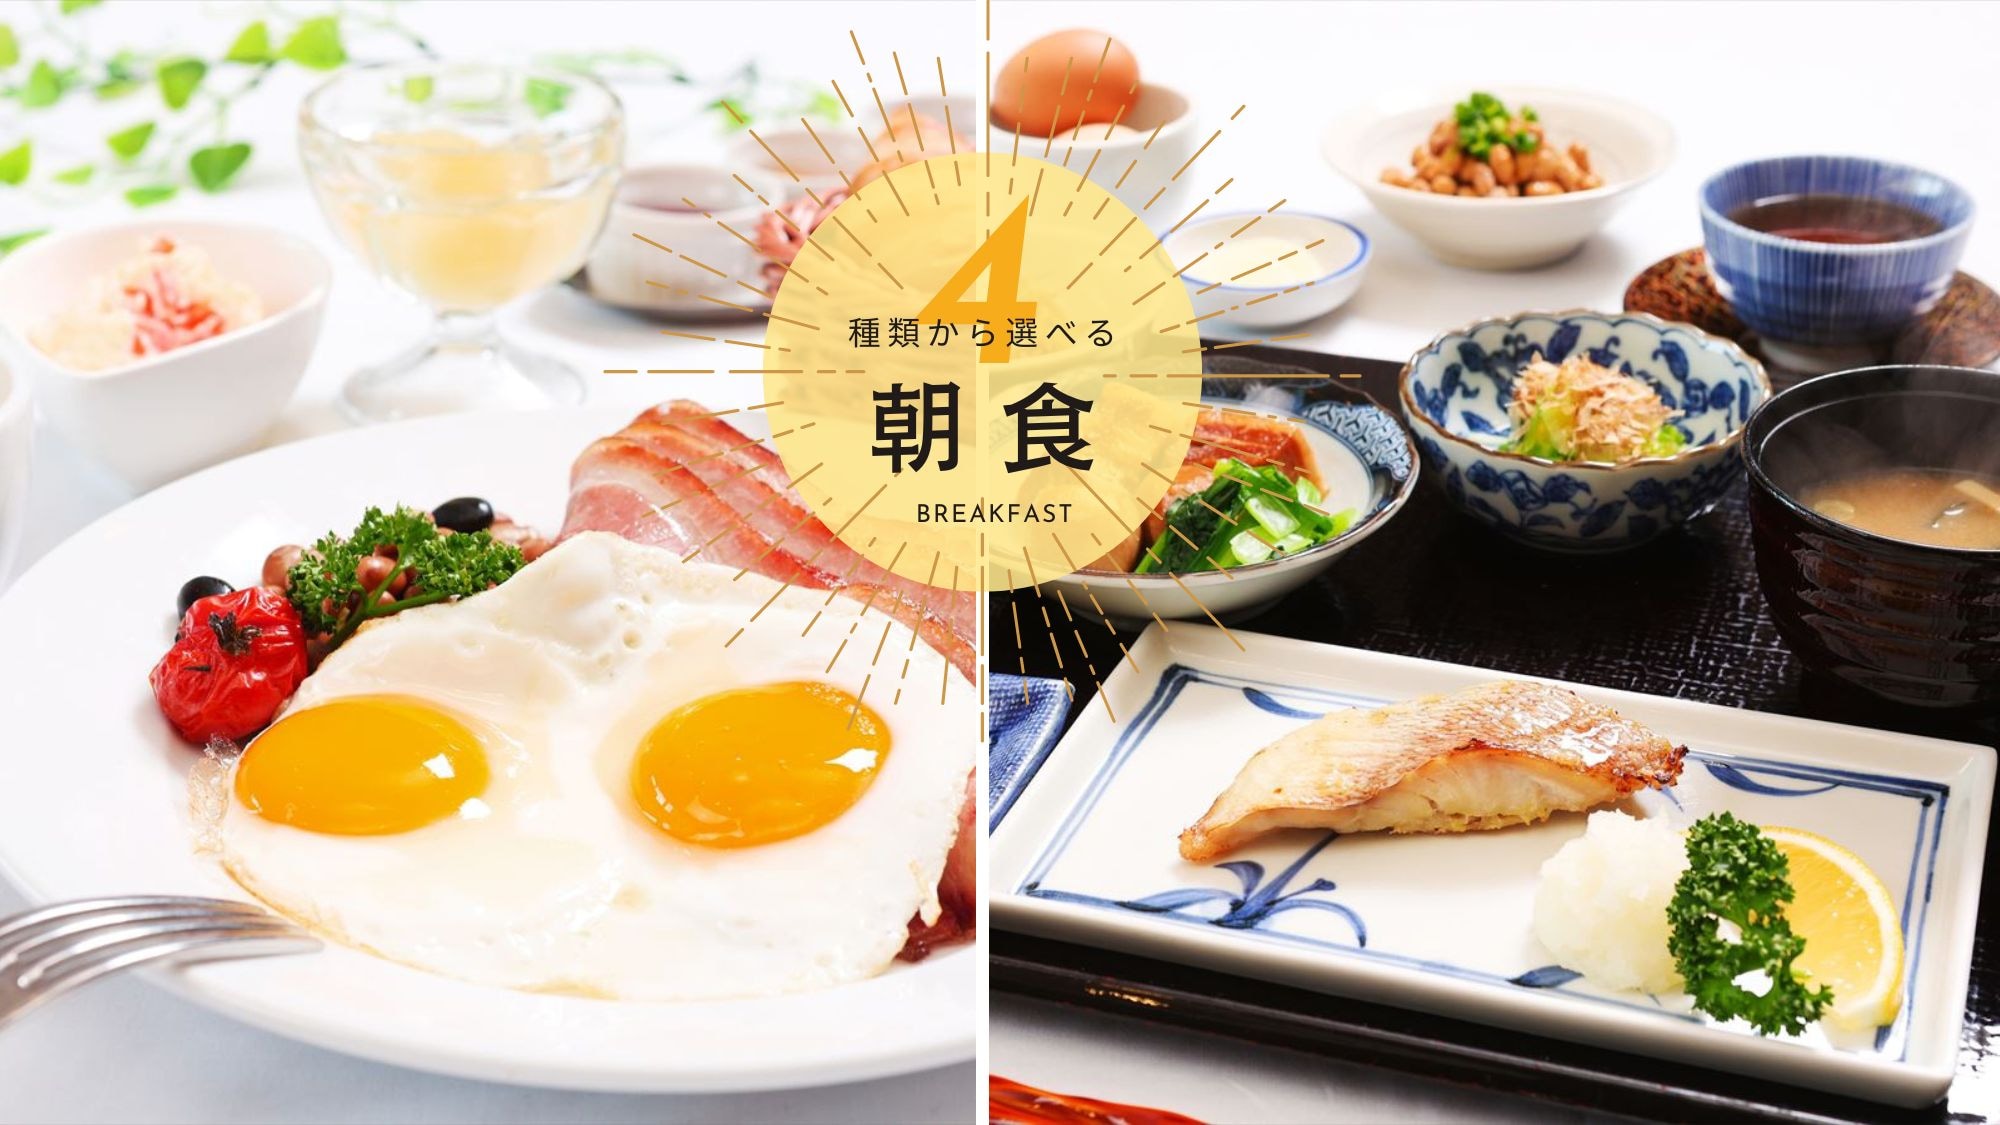 [Selectable breakfast] Four types of "Japanese", "Western", "Chinese porridge" and "Continental" that you can choose according to your mood